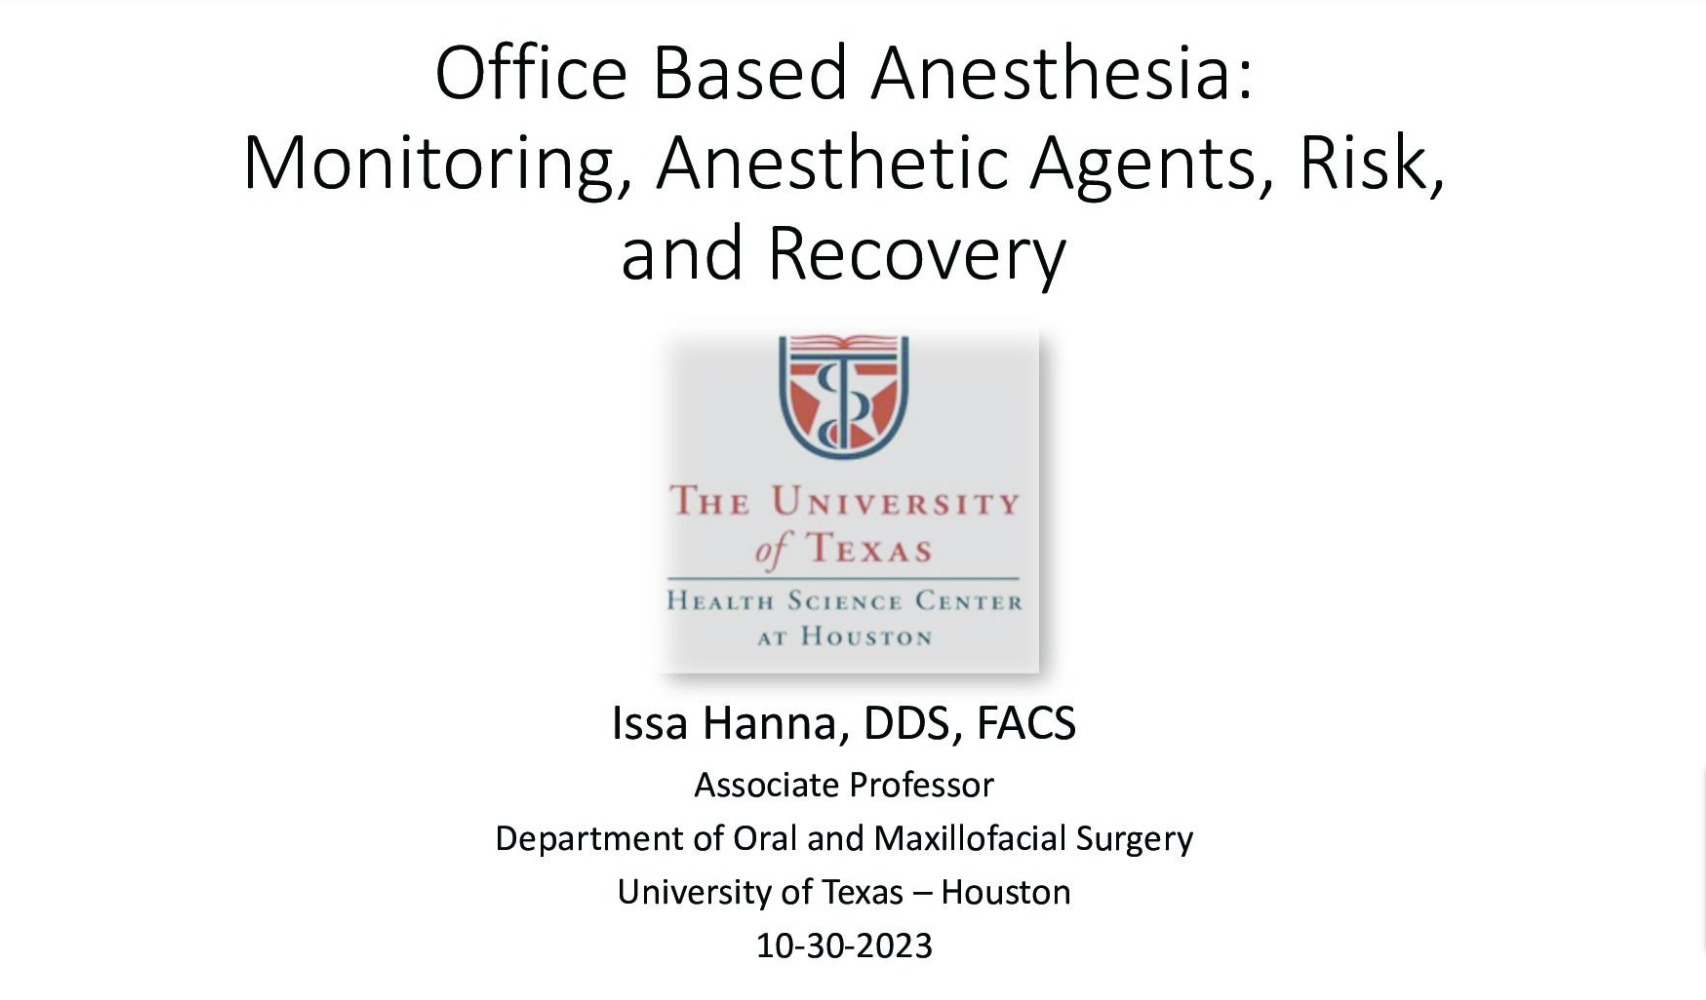 Office and OR Anesthesia, Monitoring Anesthesia Agents, and Recovery